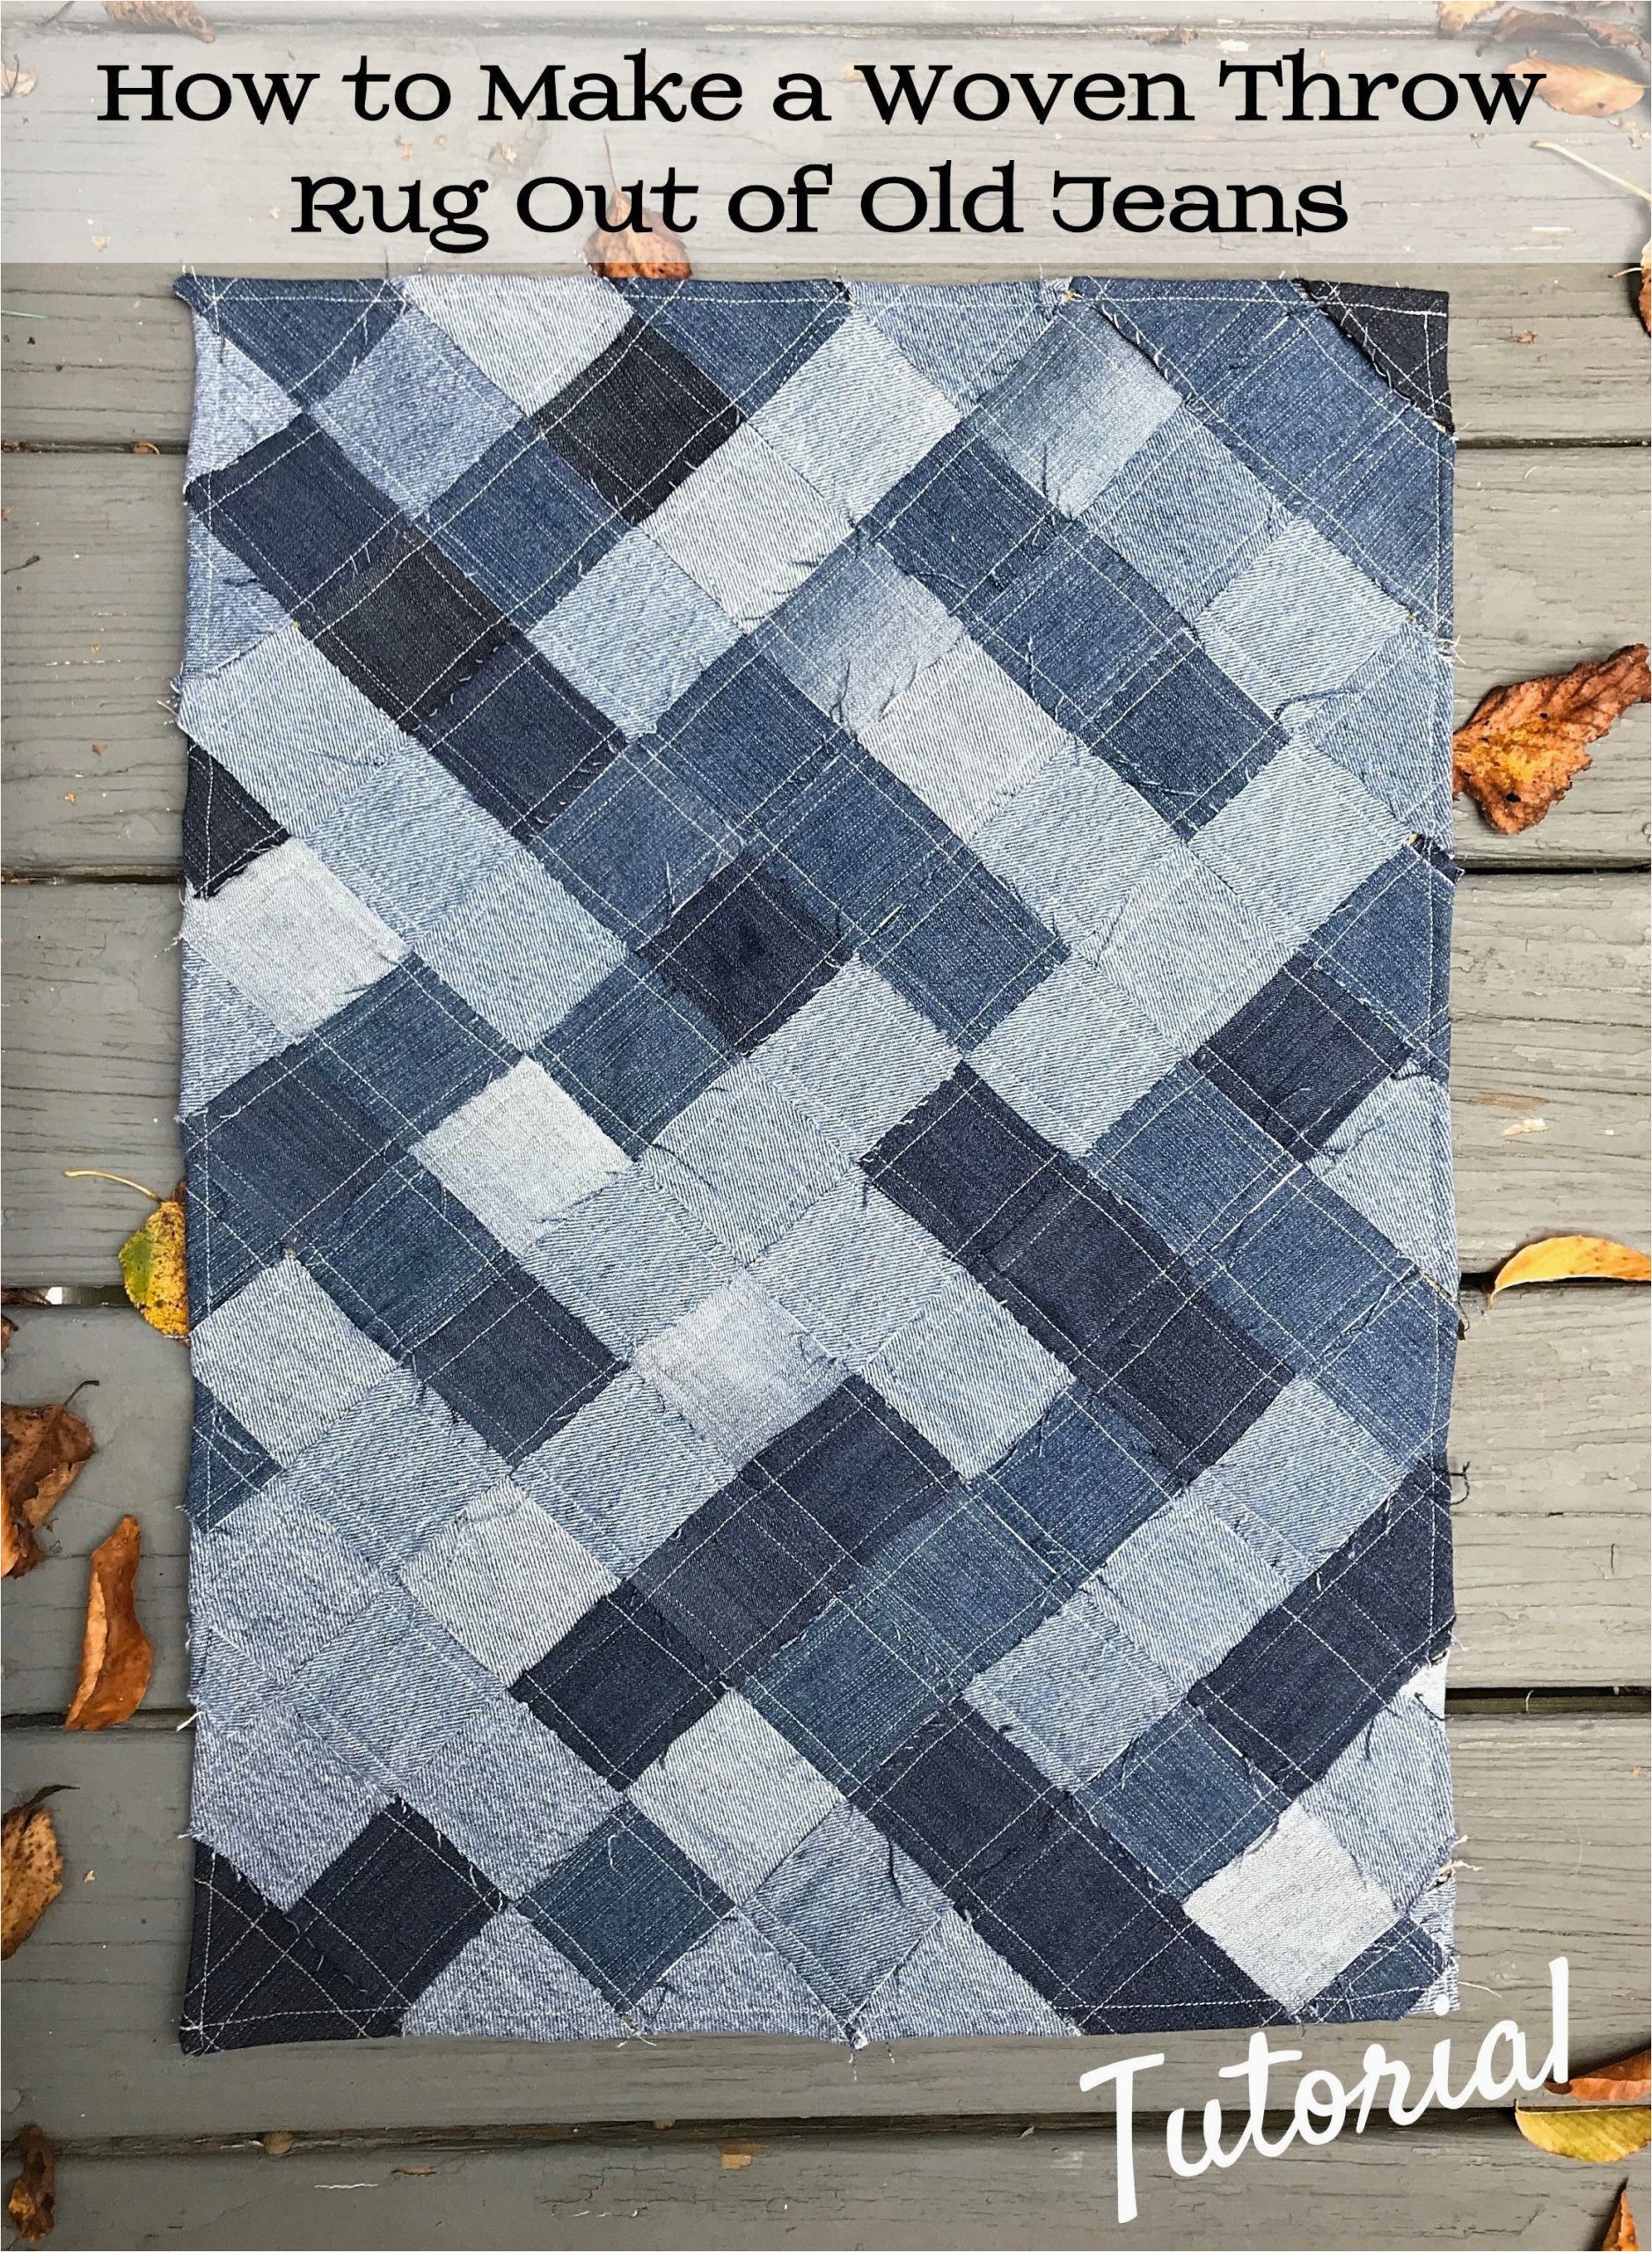 s imagesymedia content age MTc0NDc5NDI3NjIxNjI3MjQw how to make a woven throw rug out of recycled denim jeans